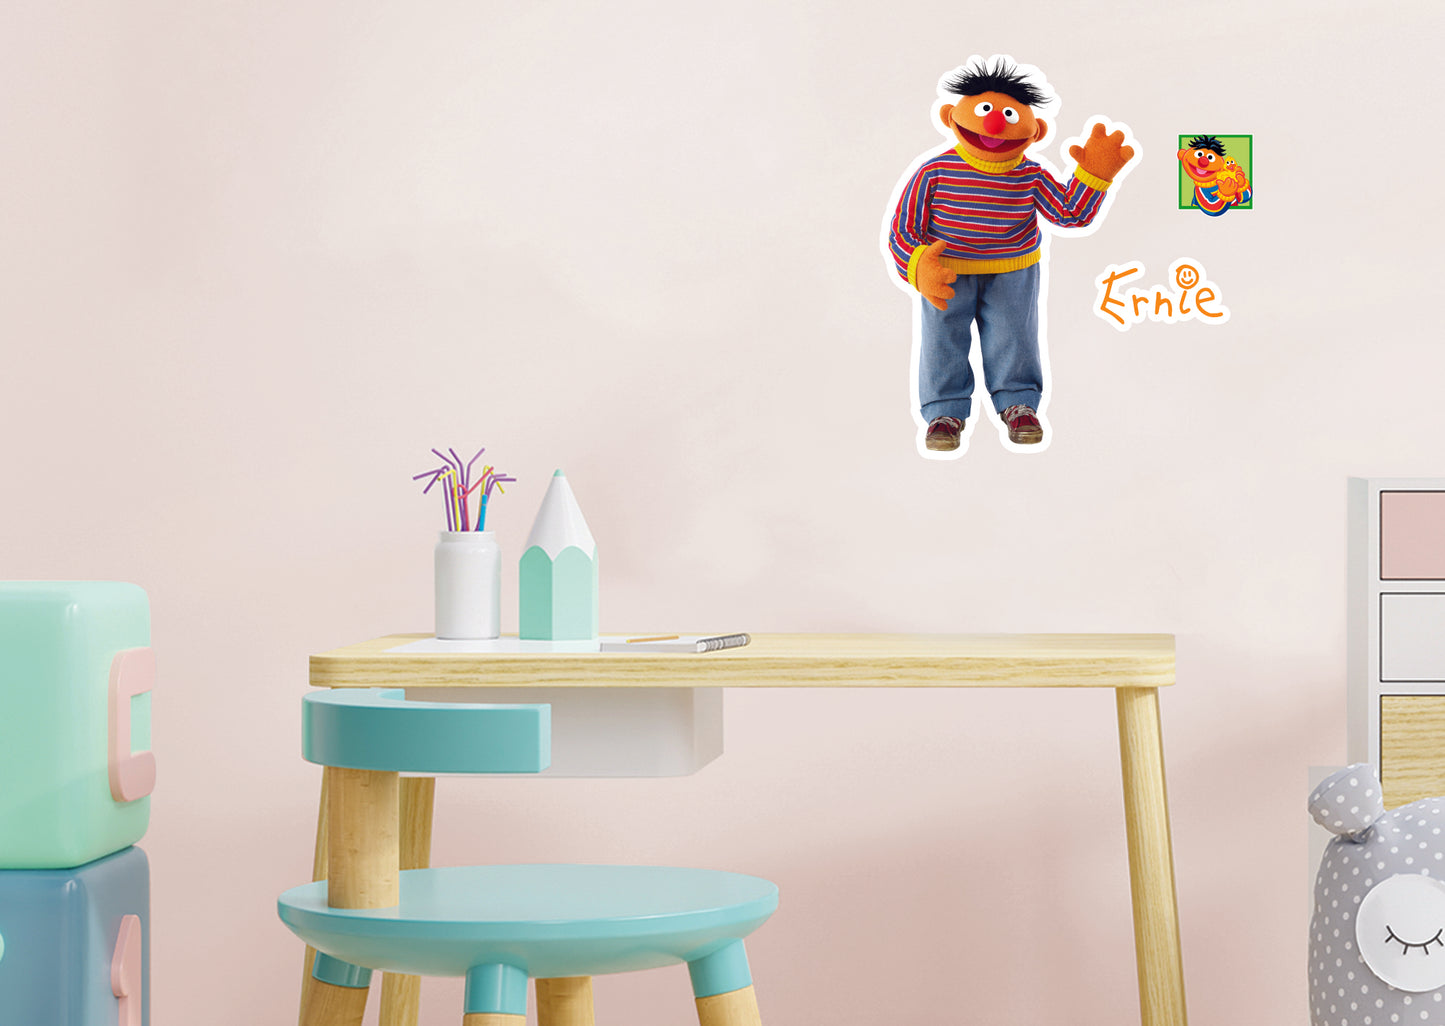 Ernie RealBig - Officially Licensed Sesame Street Removable Adhesive Decal